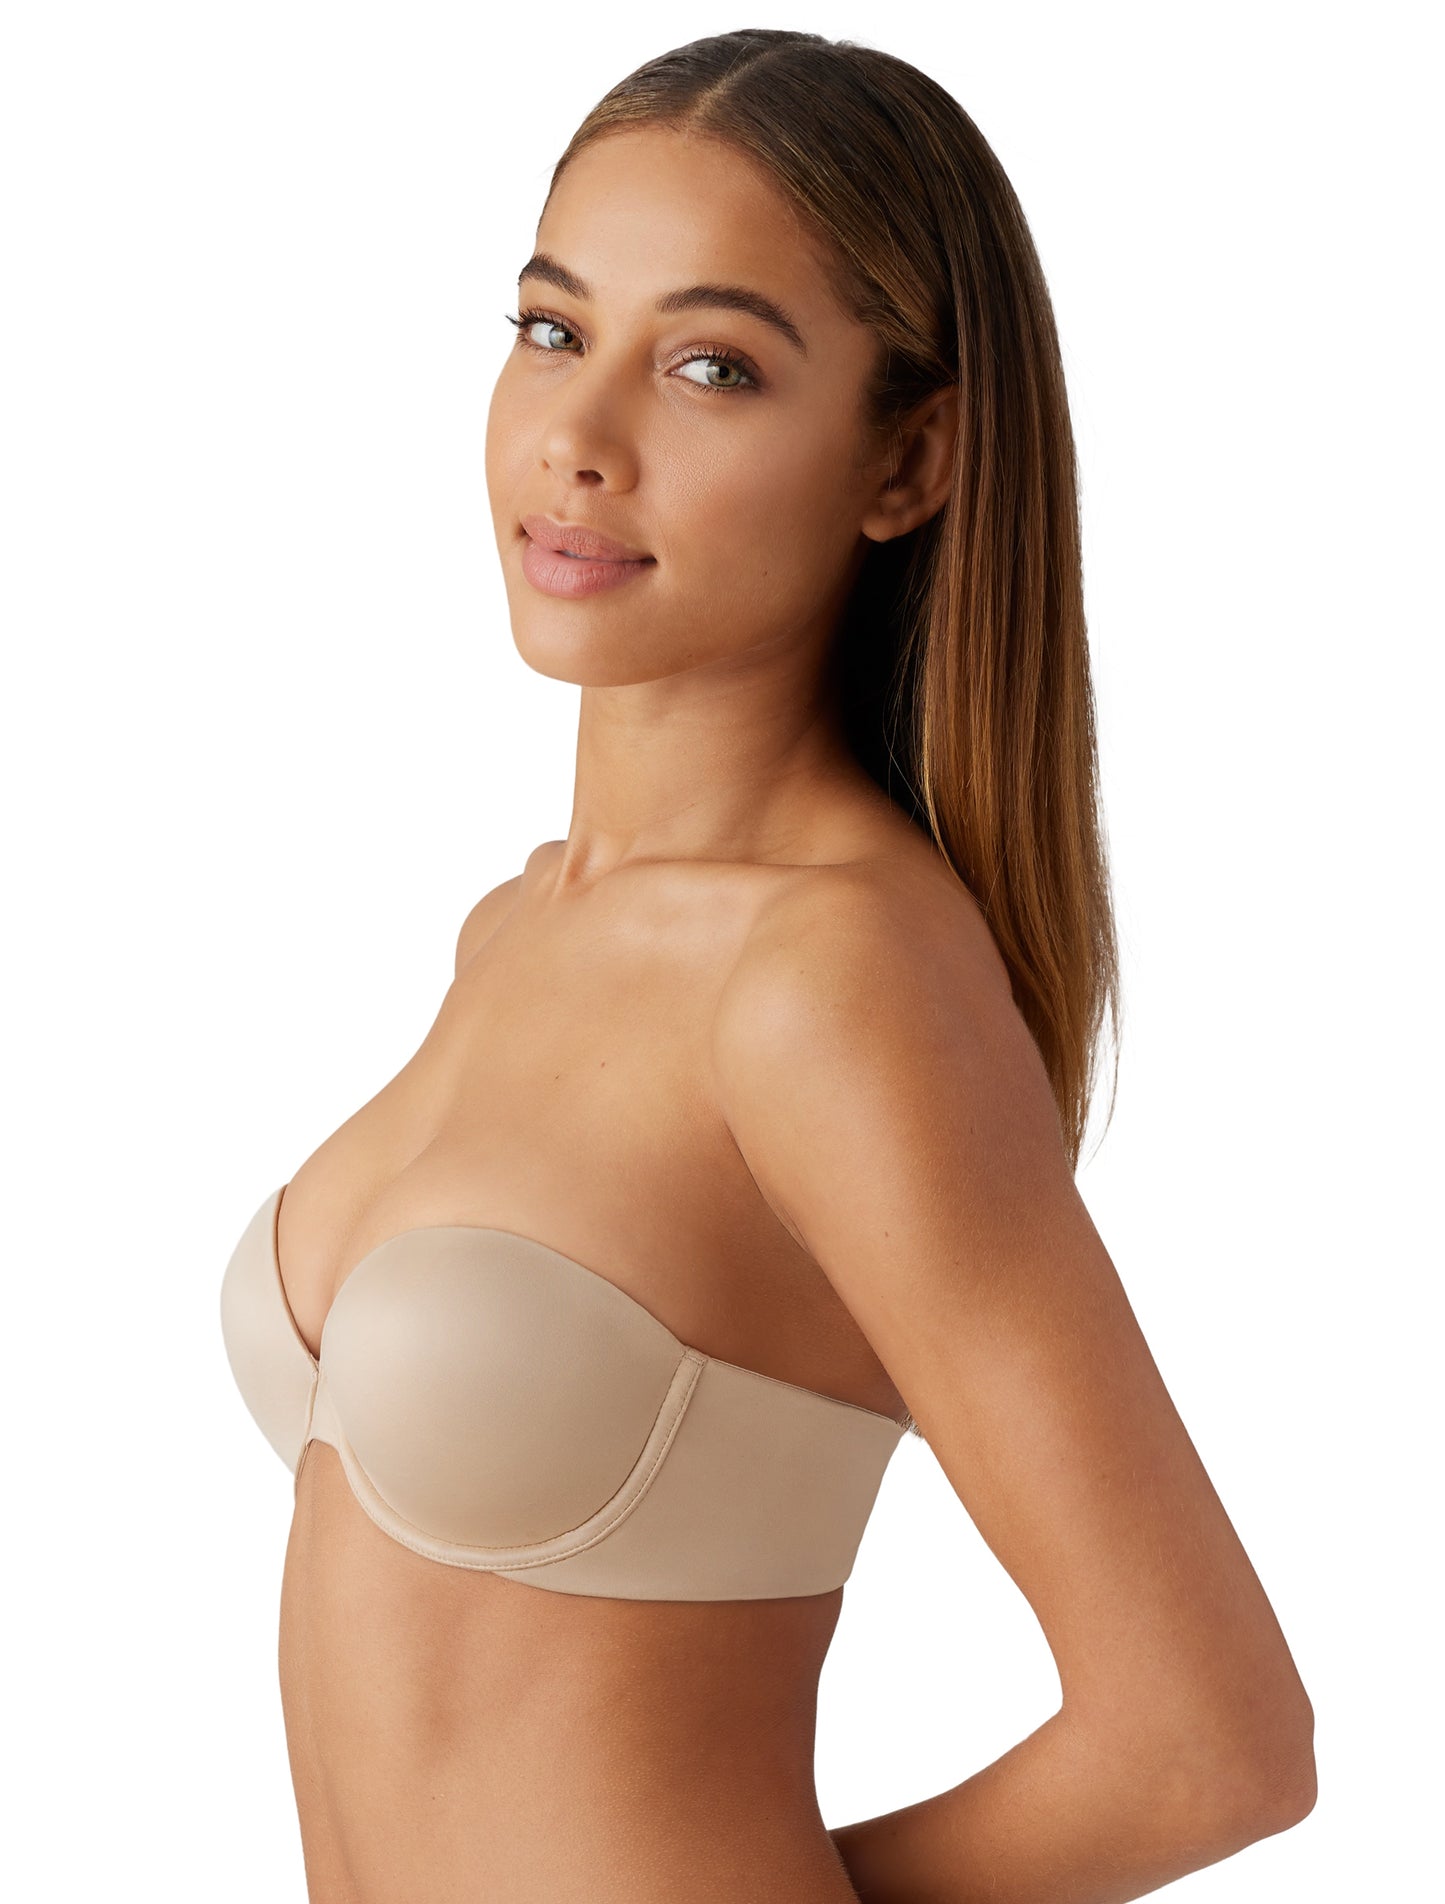 Strapless Backless Bra Market Size [US$ Mn] and Growth Rate in the  Forcasted Report to 2031